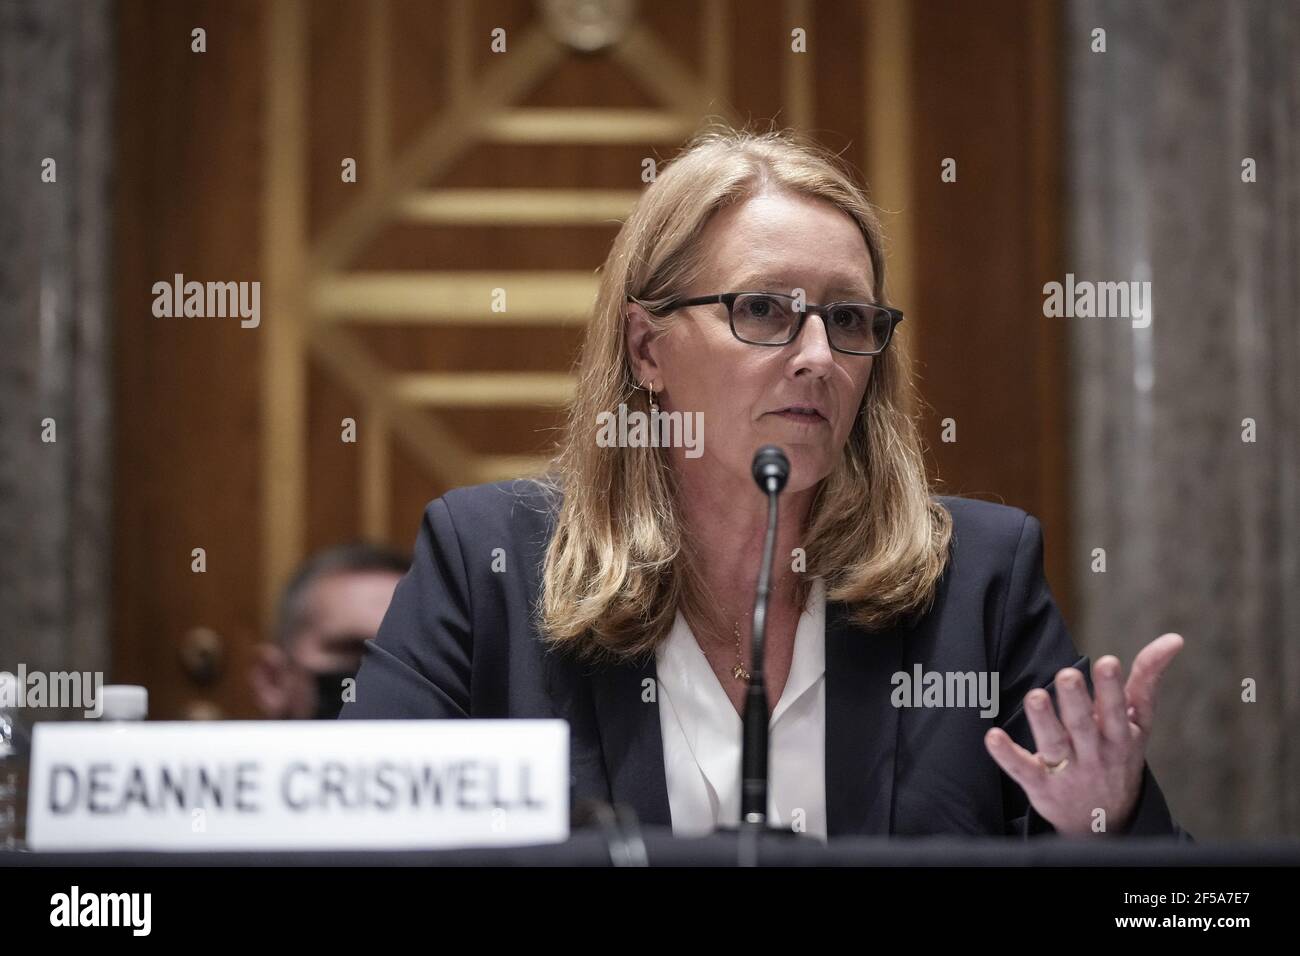 Washington, United States. 25th Mar, 2021. Deanne Criswell, nominee for administrator of the Federal Emergency Management Agency (FEMA), testifies during her confirmation hearing before the Senate Committee on Homeland Security and Governmental Affairs on Capitol Hill on March 25, 2021 in Washington, DC. If confirmed, Criswell will become the first woman to lead FEMA. Pool Photo by Drew Angerer/UPI Credit: UPI/Alamy Live News Stock Photo